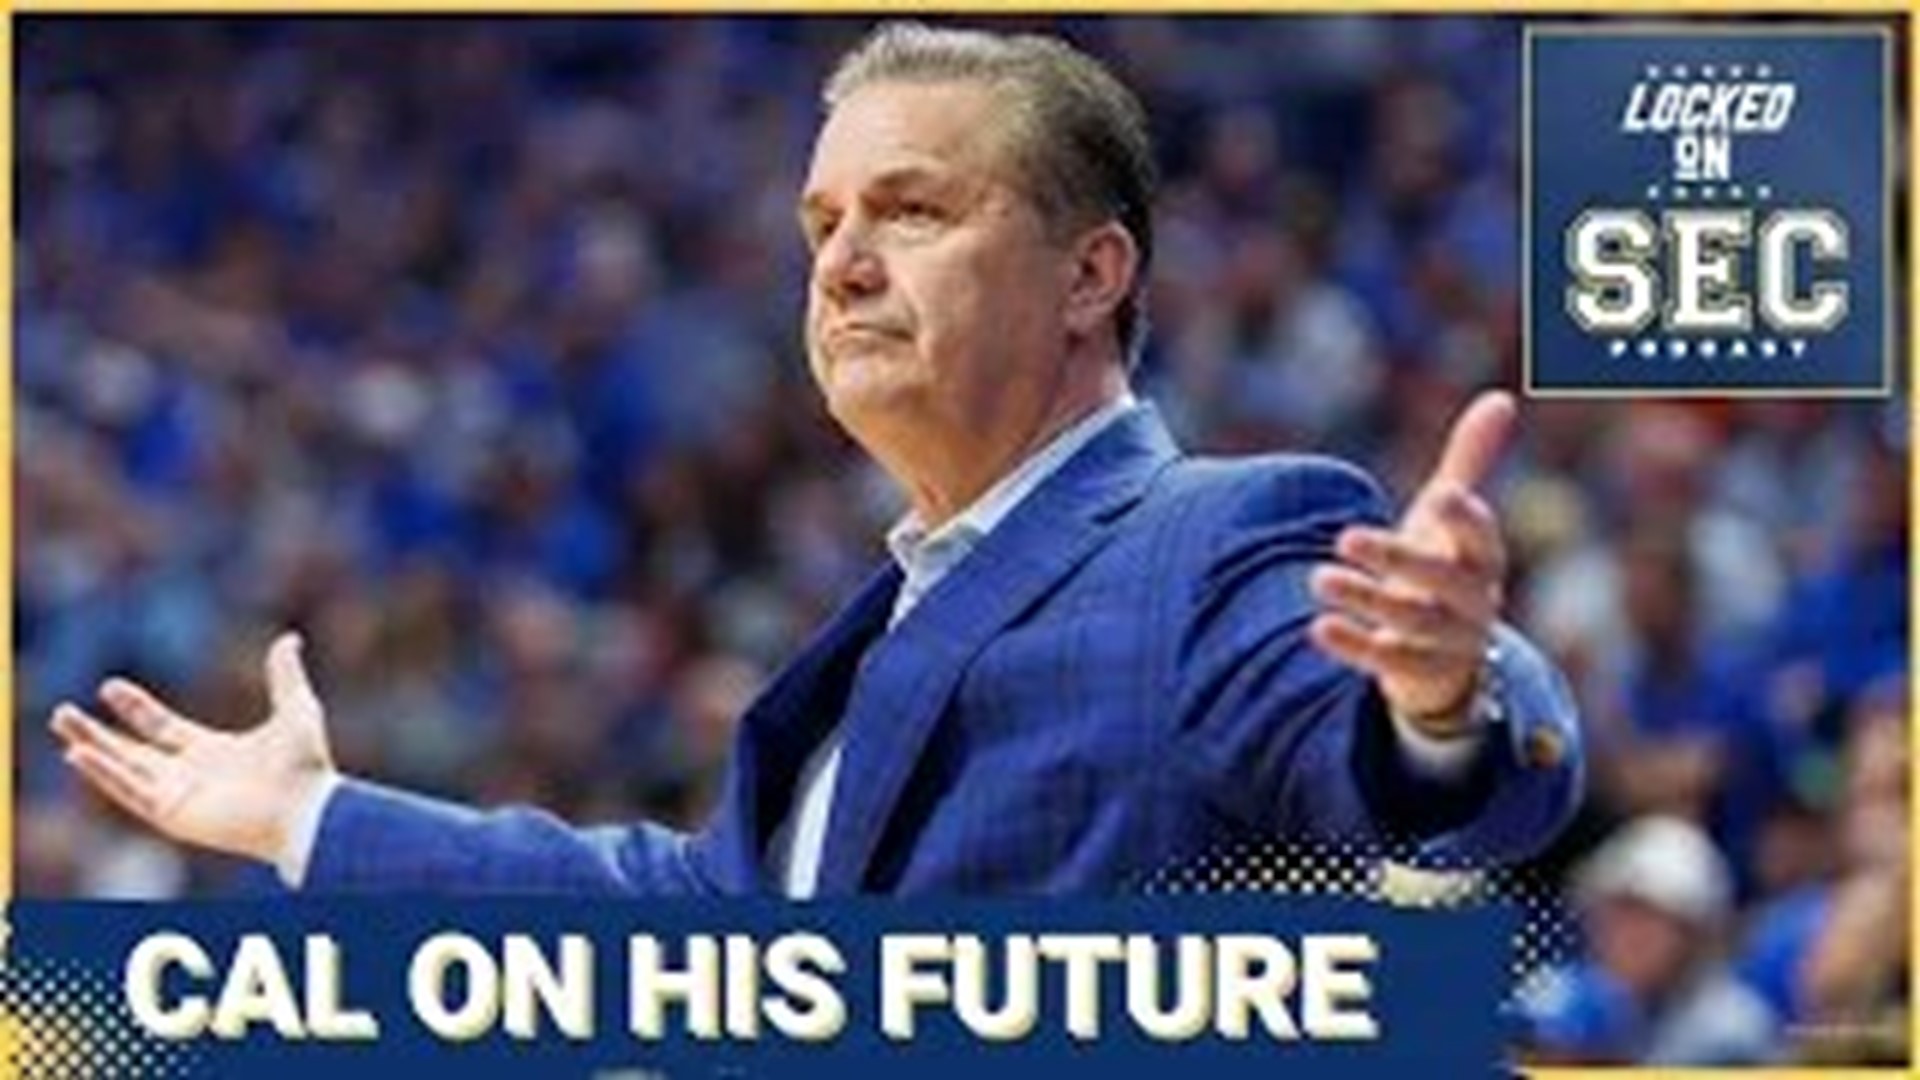 On today's show, we react to the John Calipari Radio Show which aired Monday evening, as questions surrounding his future at Kentucky continue to swirl.